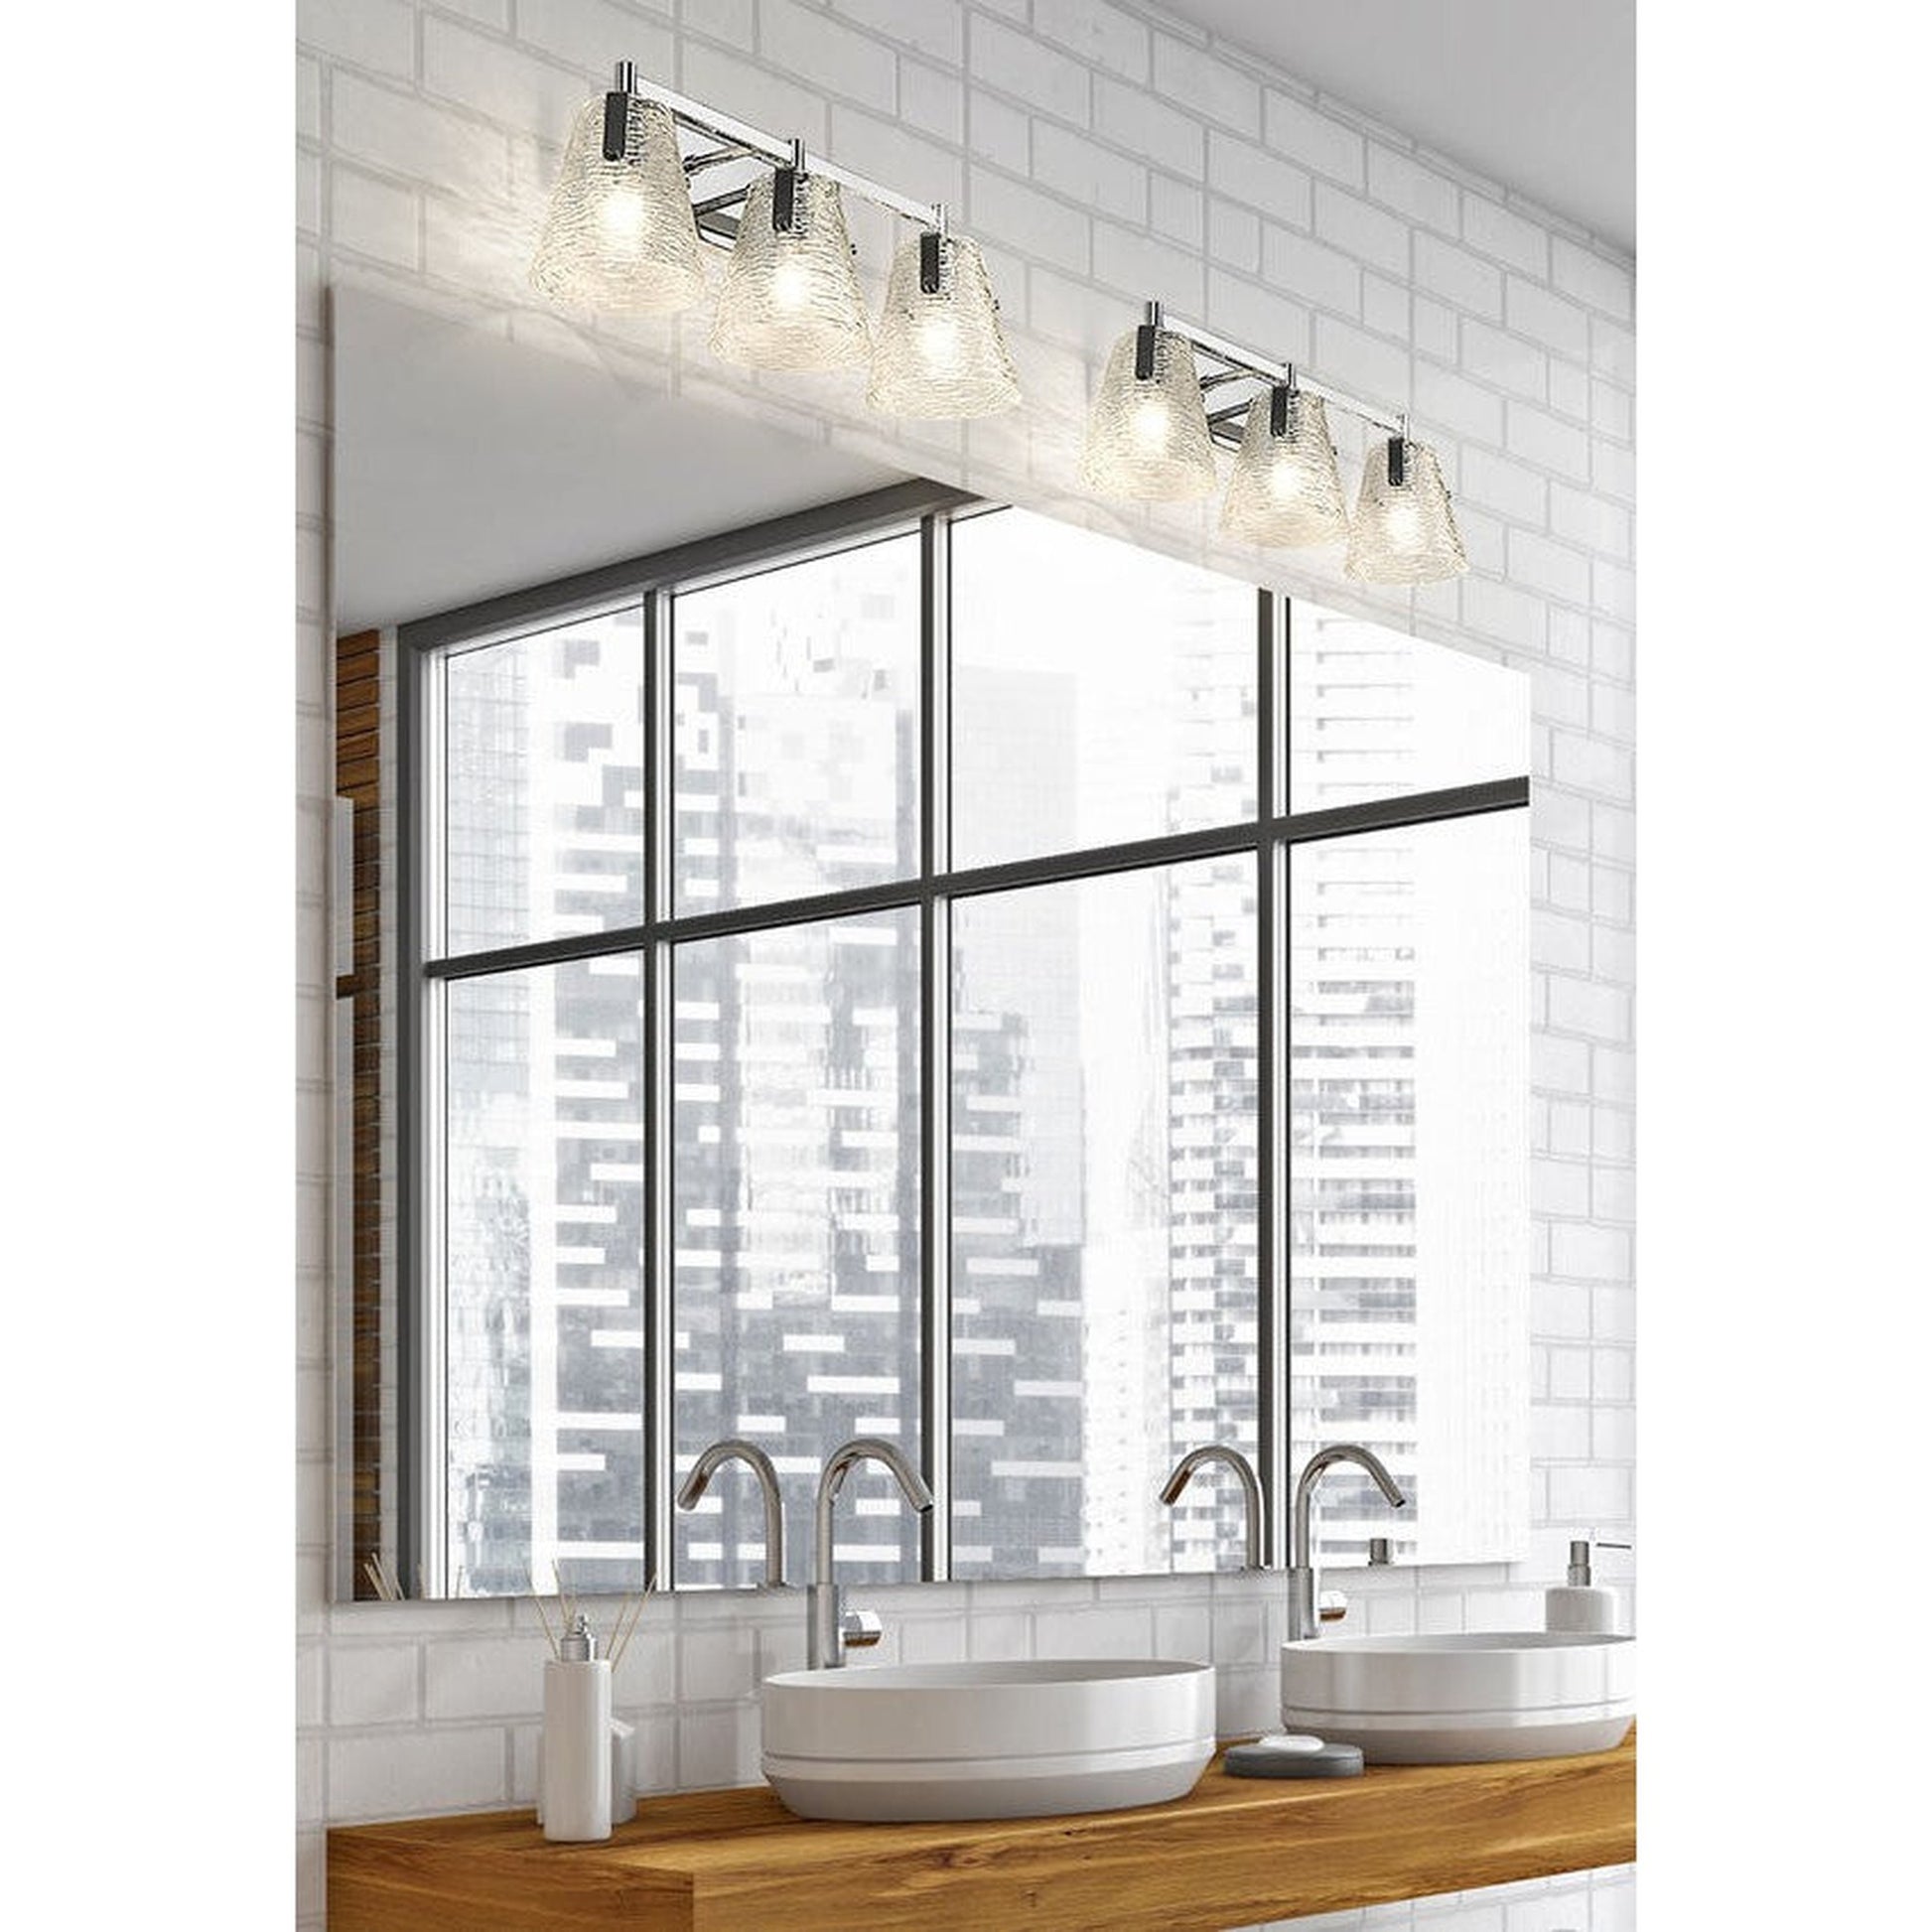 Z-Lite Analia 26" 3-Light Chrome and Clear Ribbed Glass Shade Vanity Light